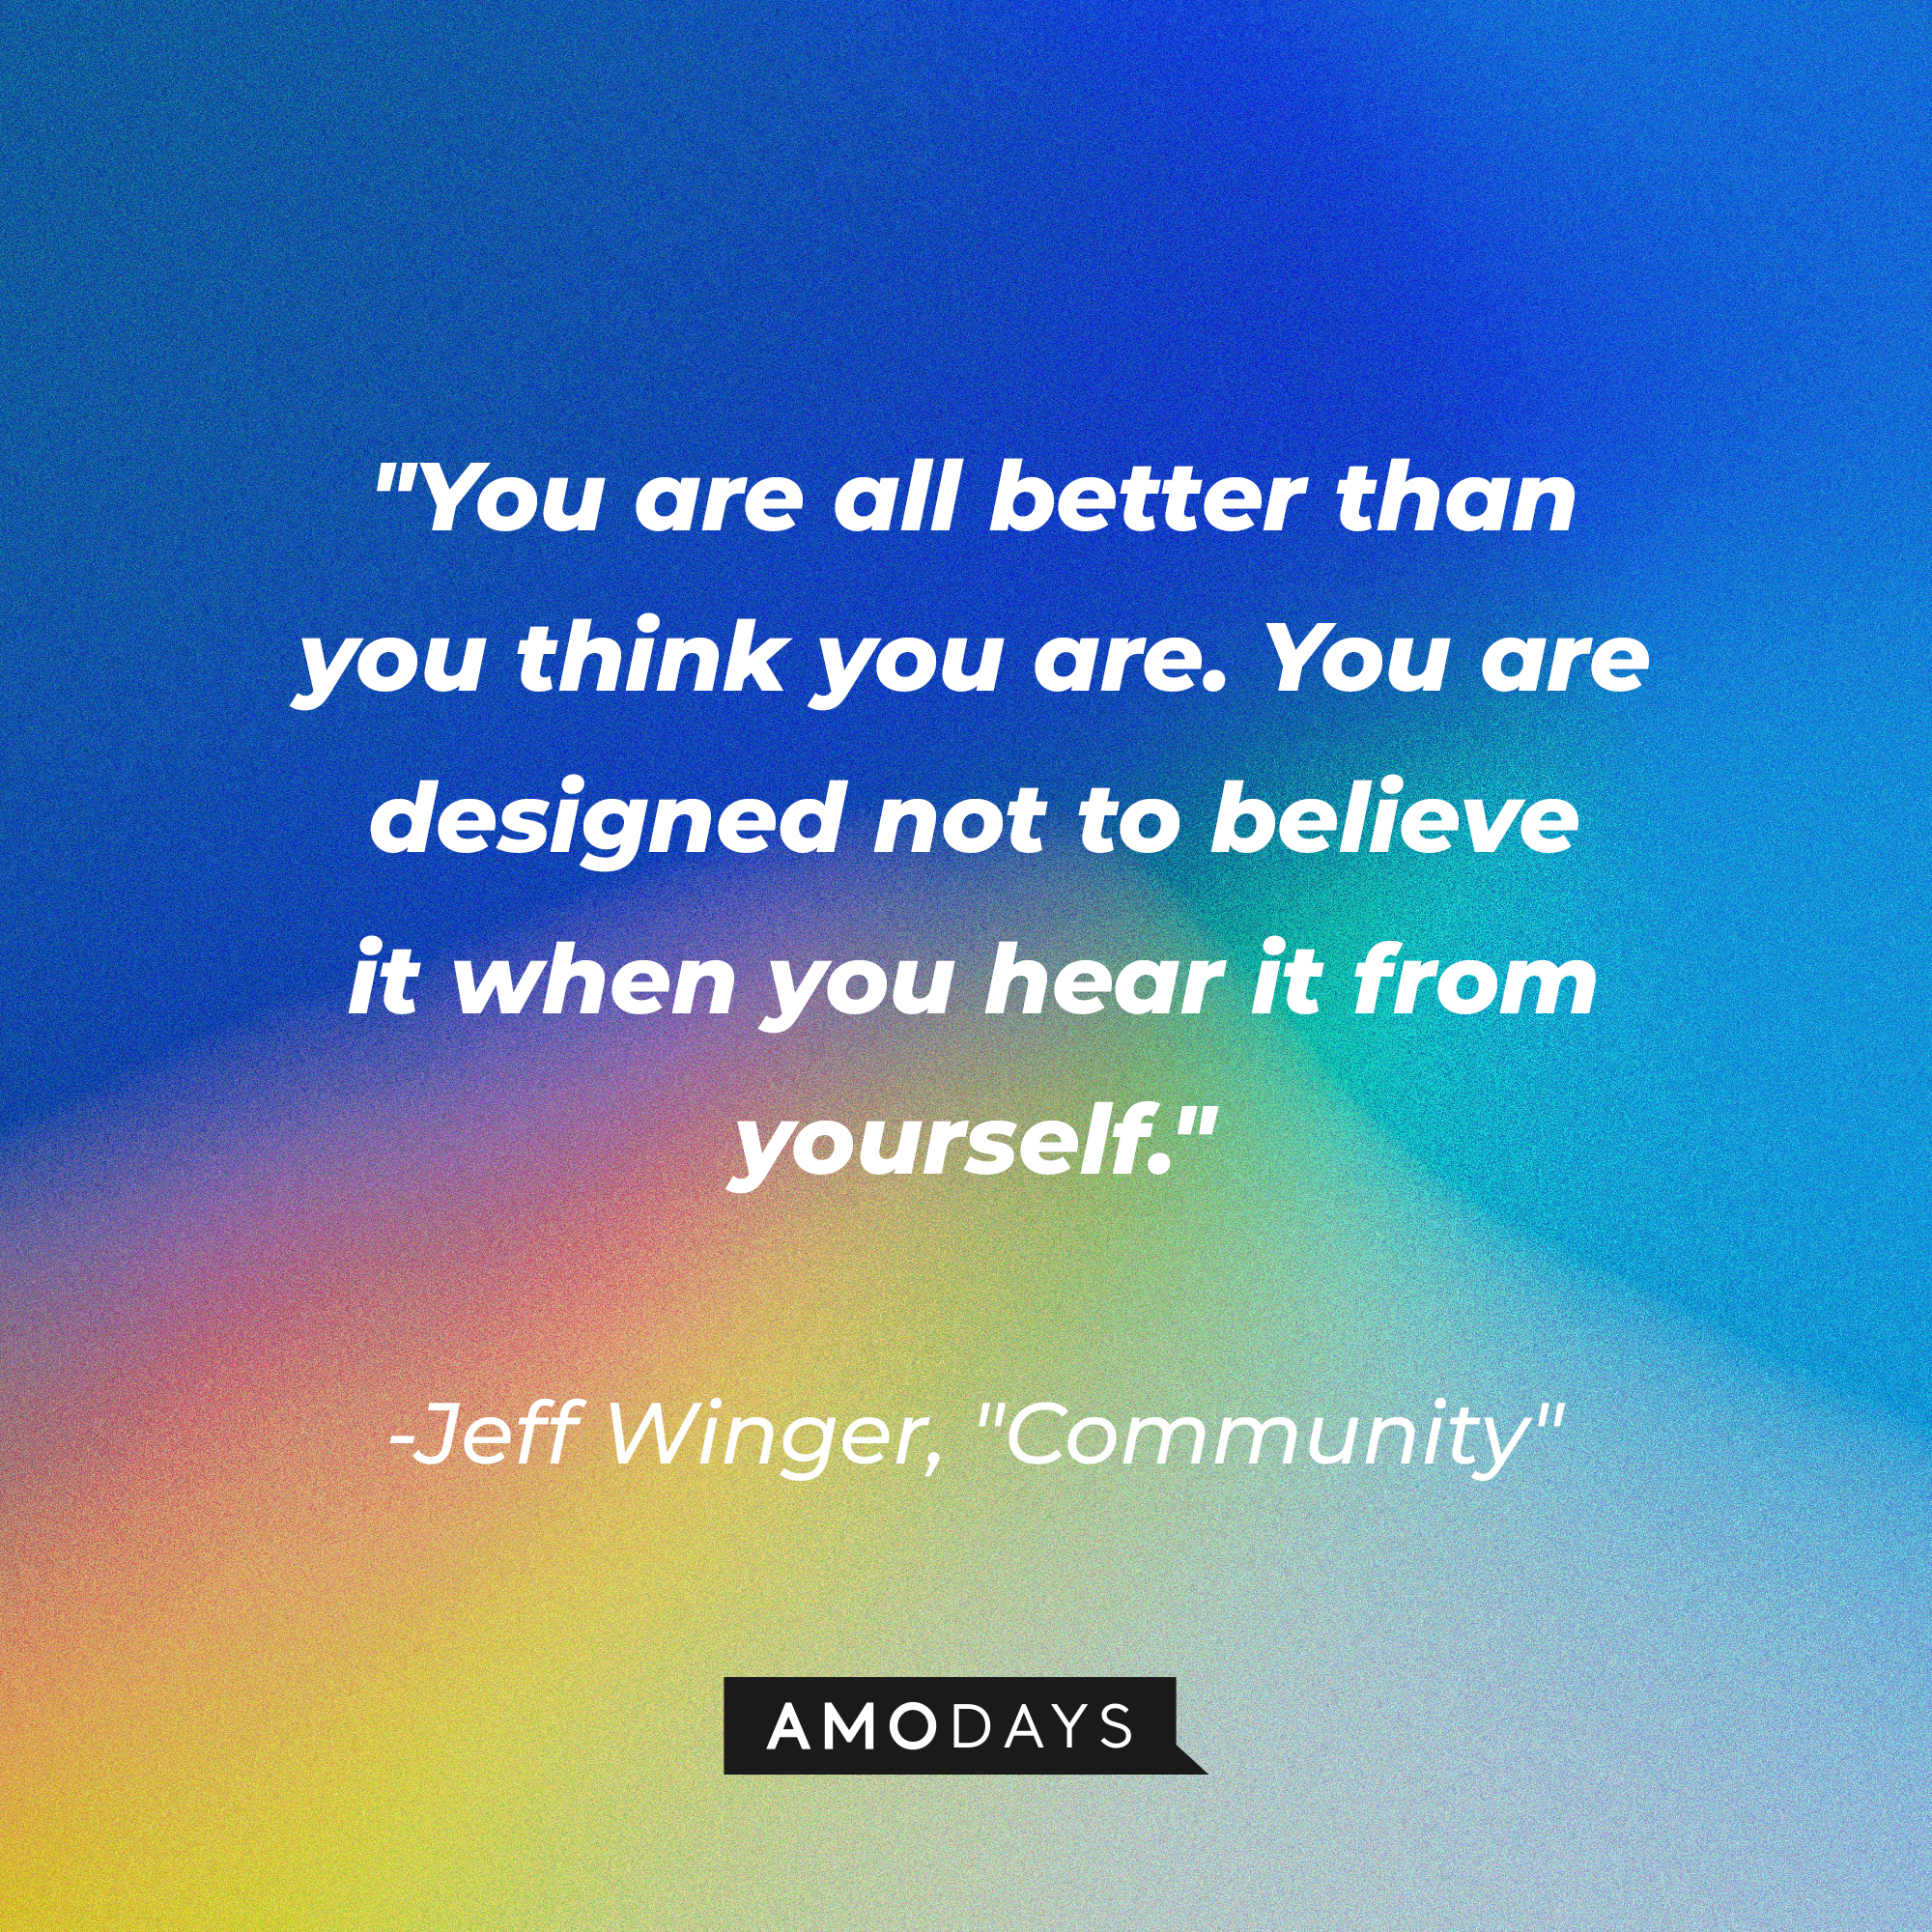 Jeff Winger's quote: "You are all better than you think you are. You are designed not to believe it when you hear it from yourself." | Source: Amodays